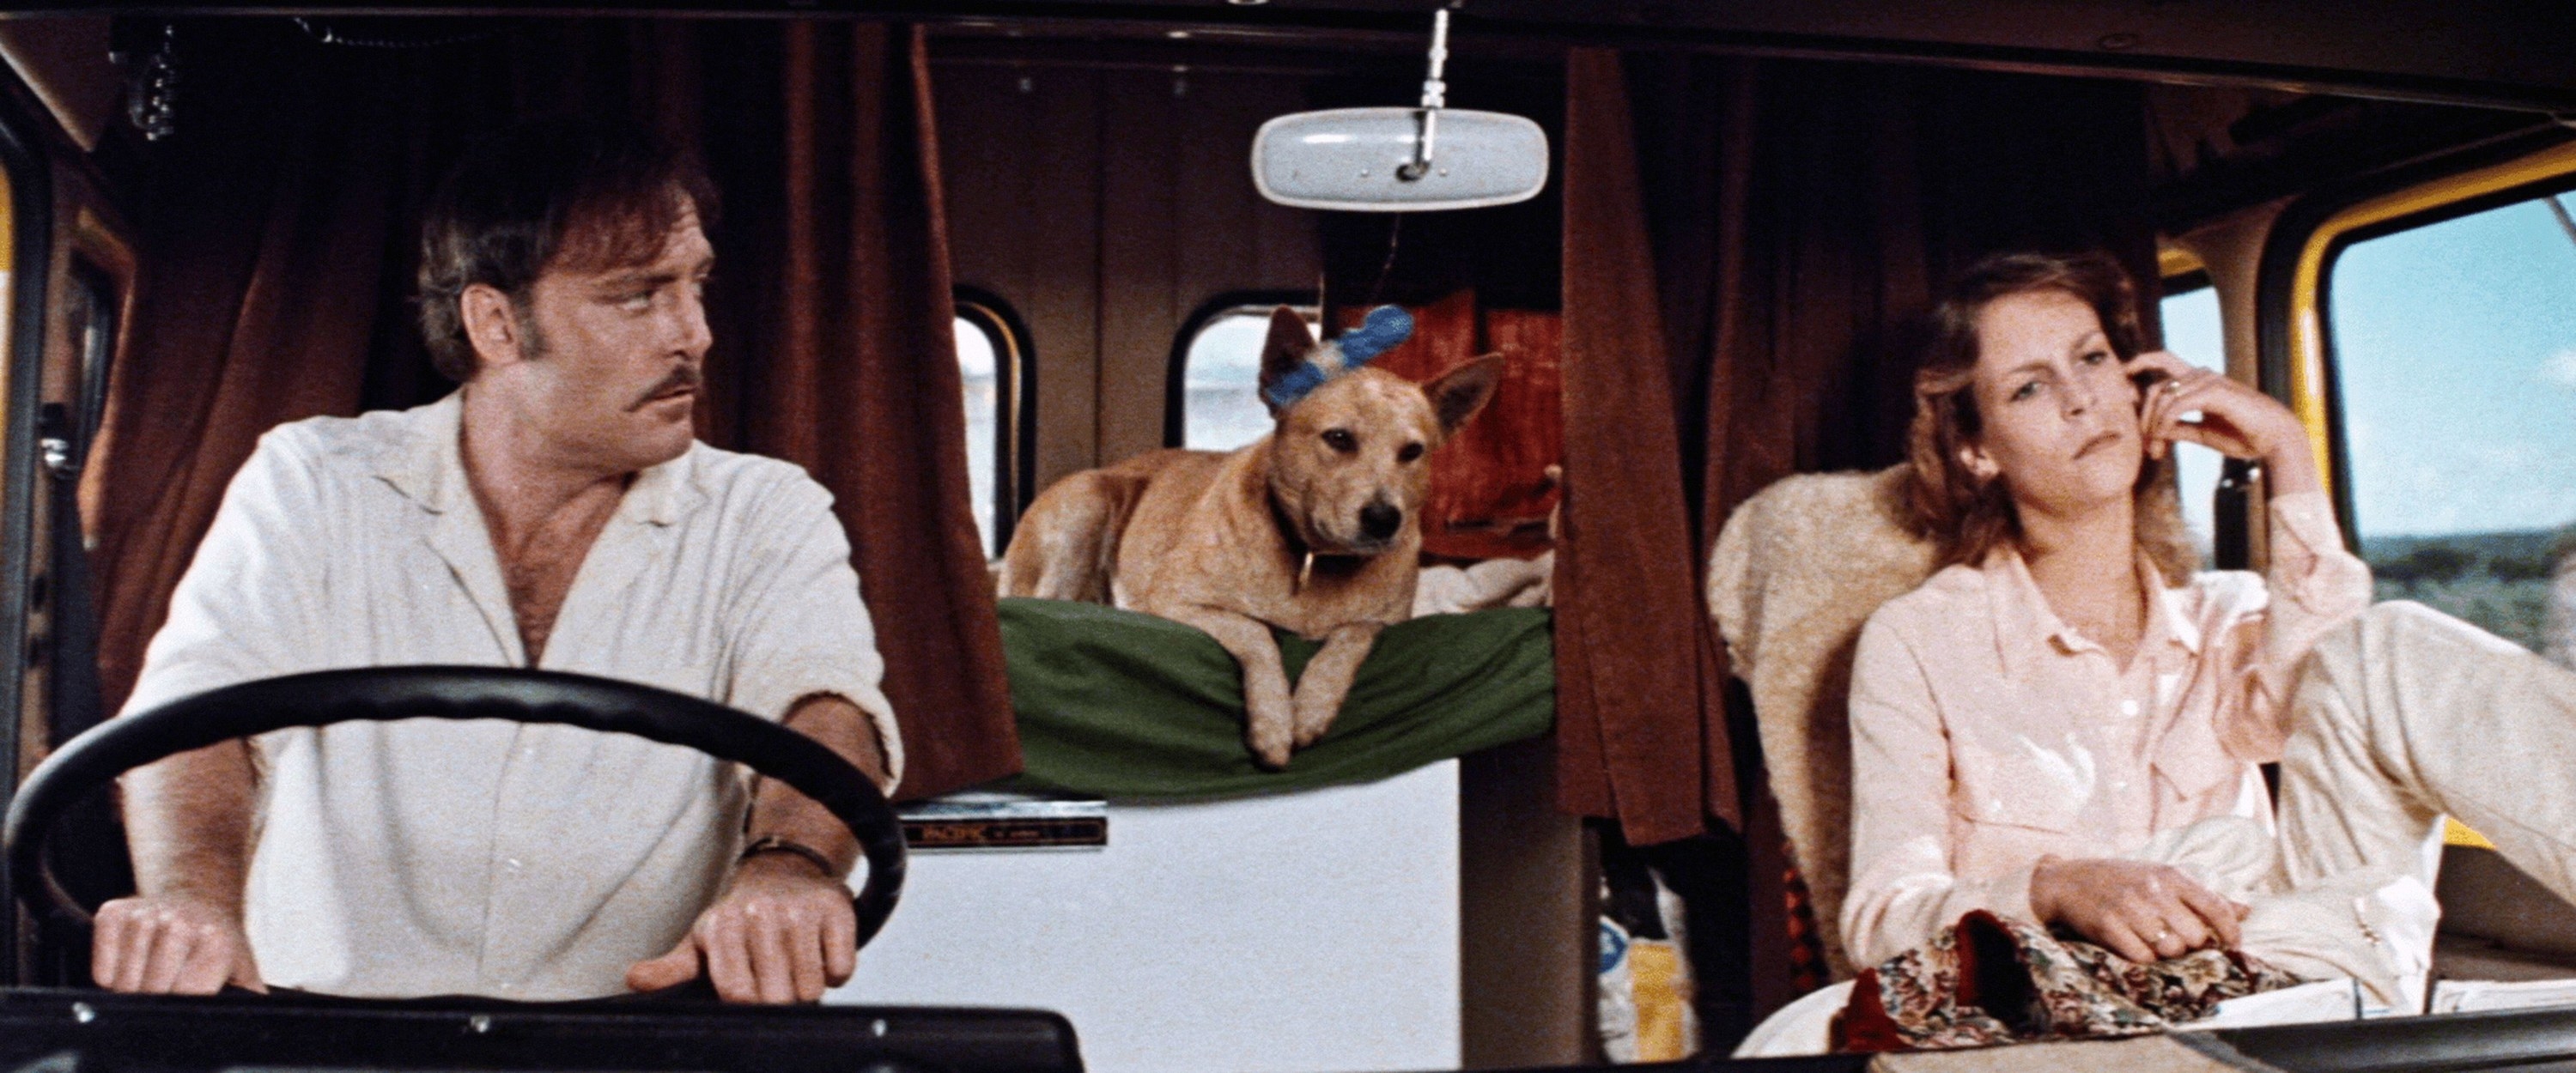 Stacy Keach, Jamie Lee Curtis and a dog ride in a truck